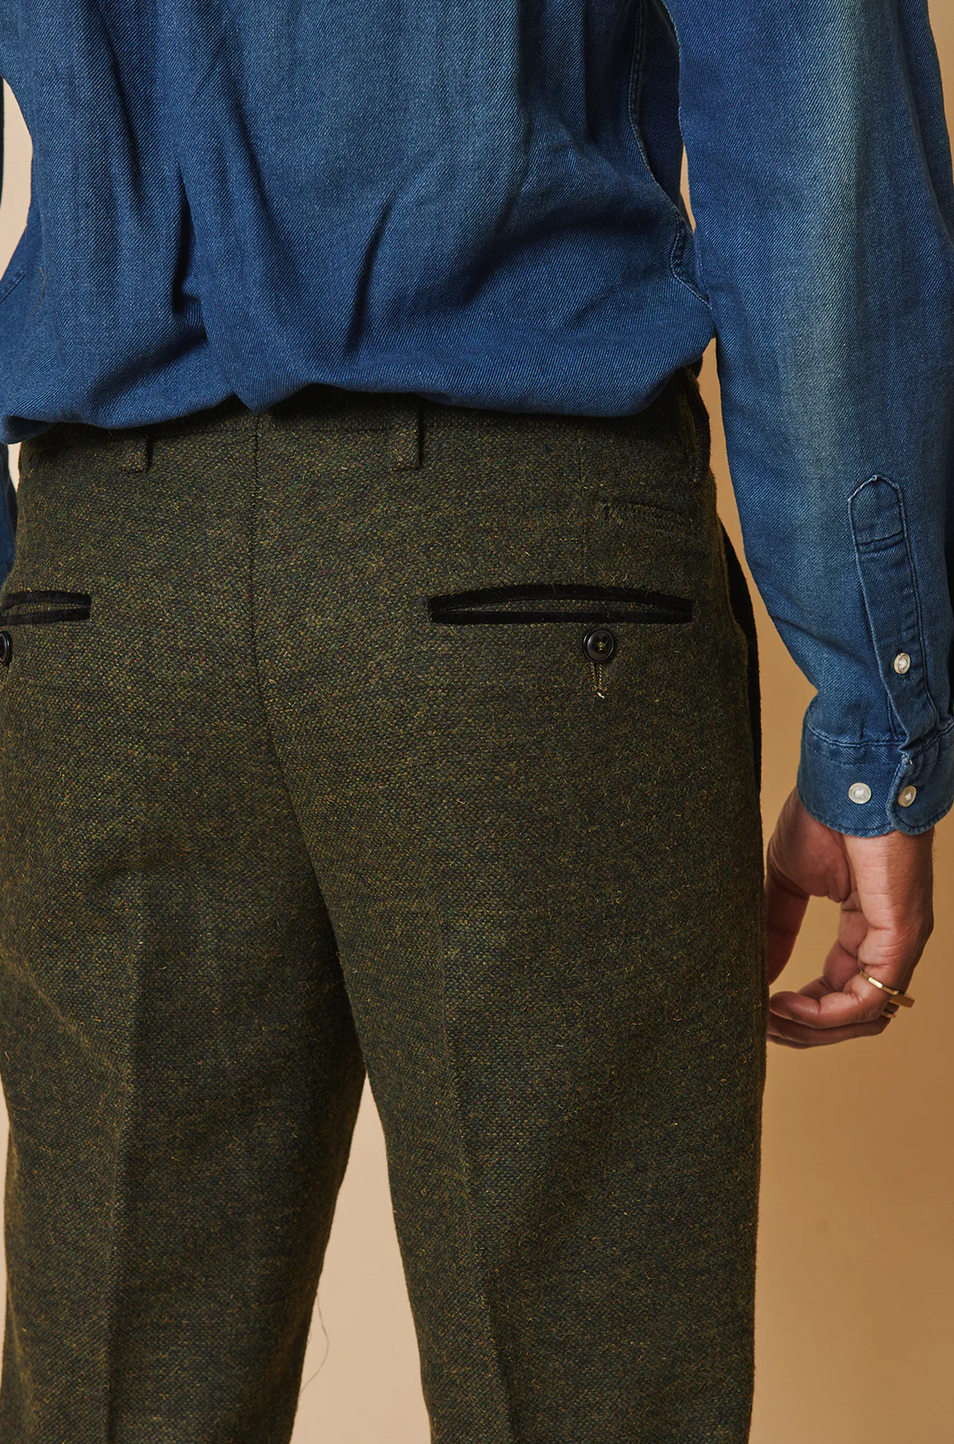 Marlow Tweed Trousers - Olive Green